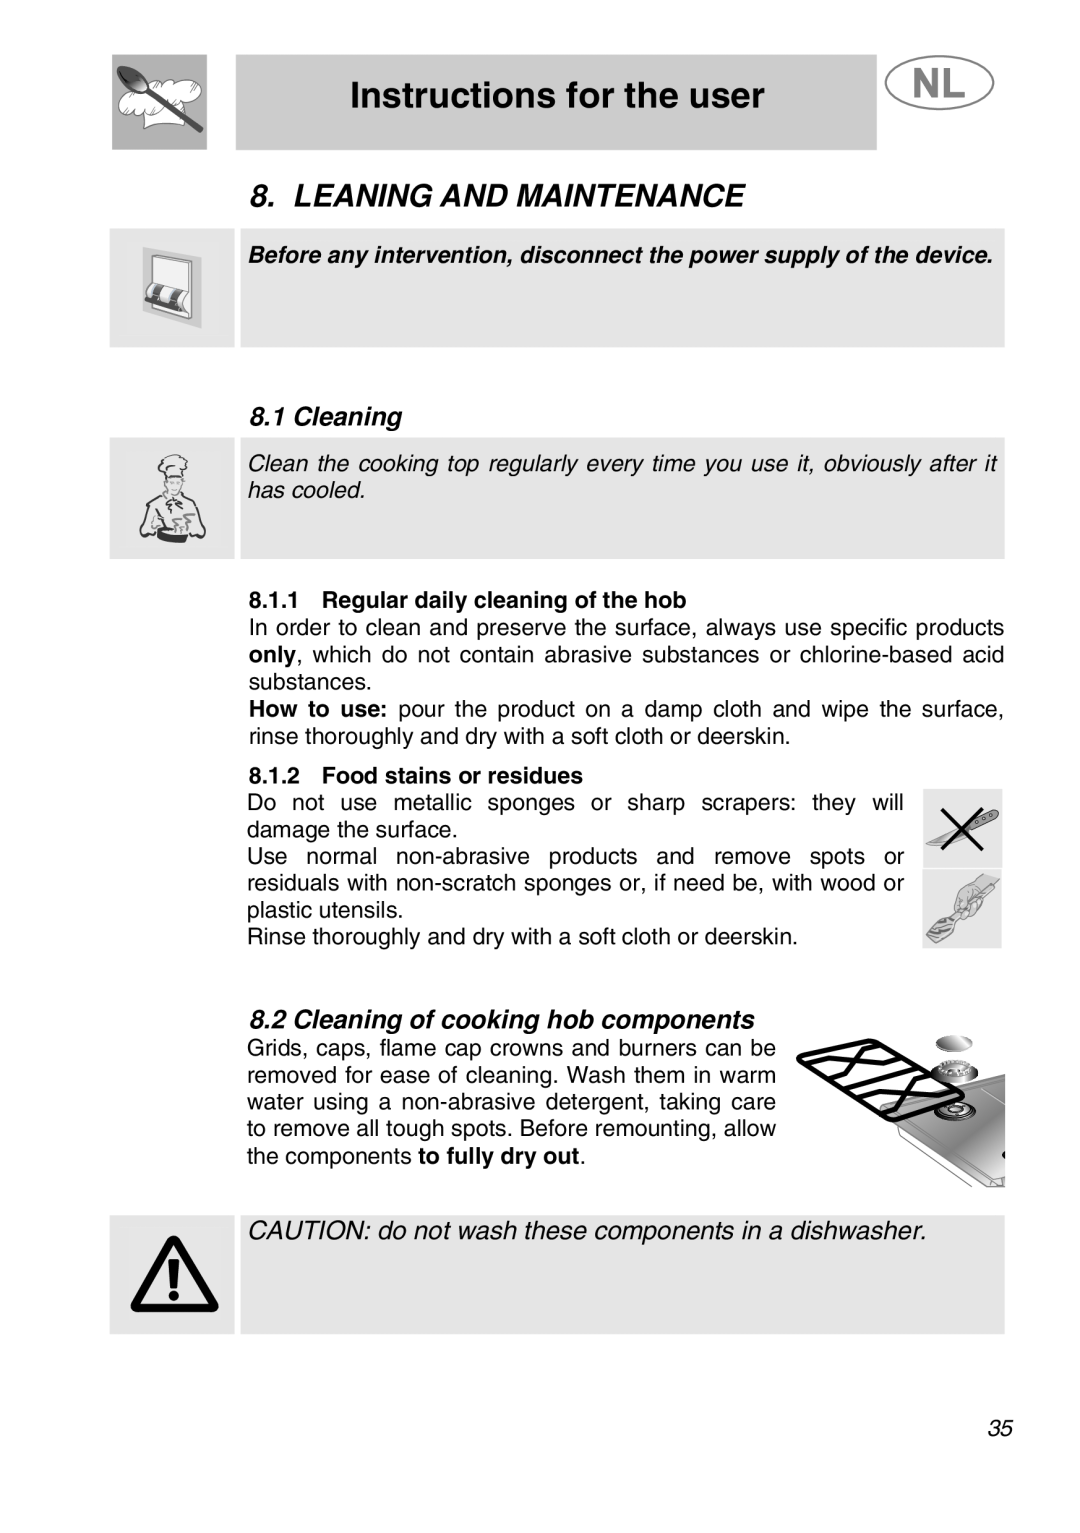 Smeg GKCO955, GKC955 manual Leaning And Maintenance, Cleaning of cooking hob components, Instructions for the user 